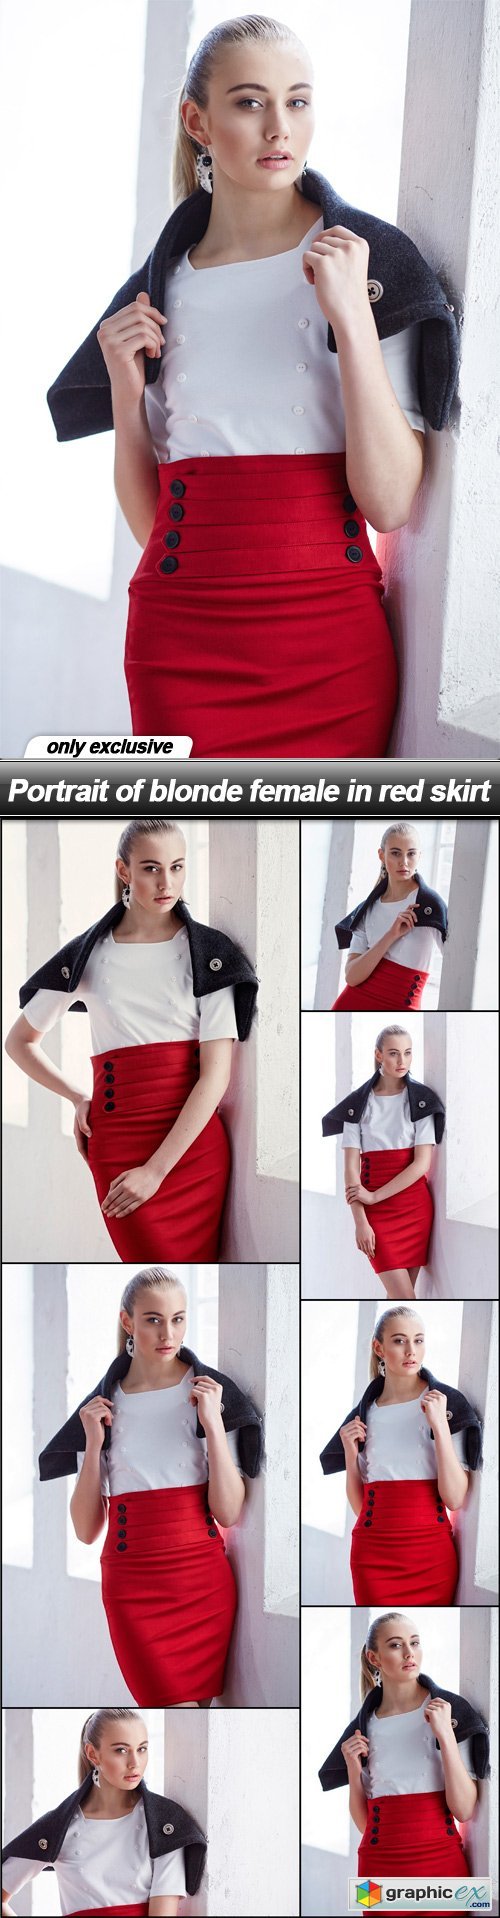 Portrait of blonde female in red skirt - 7 UHQ JPEG